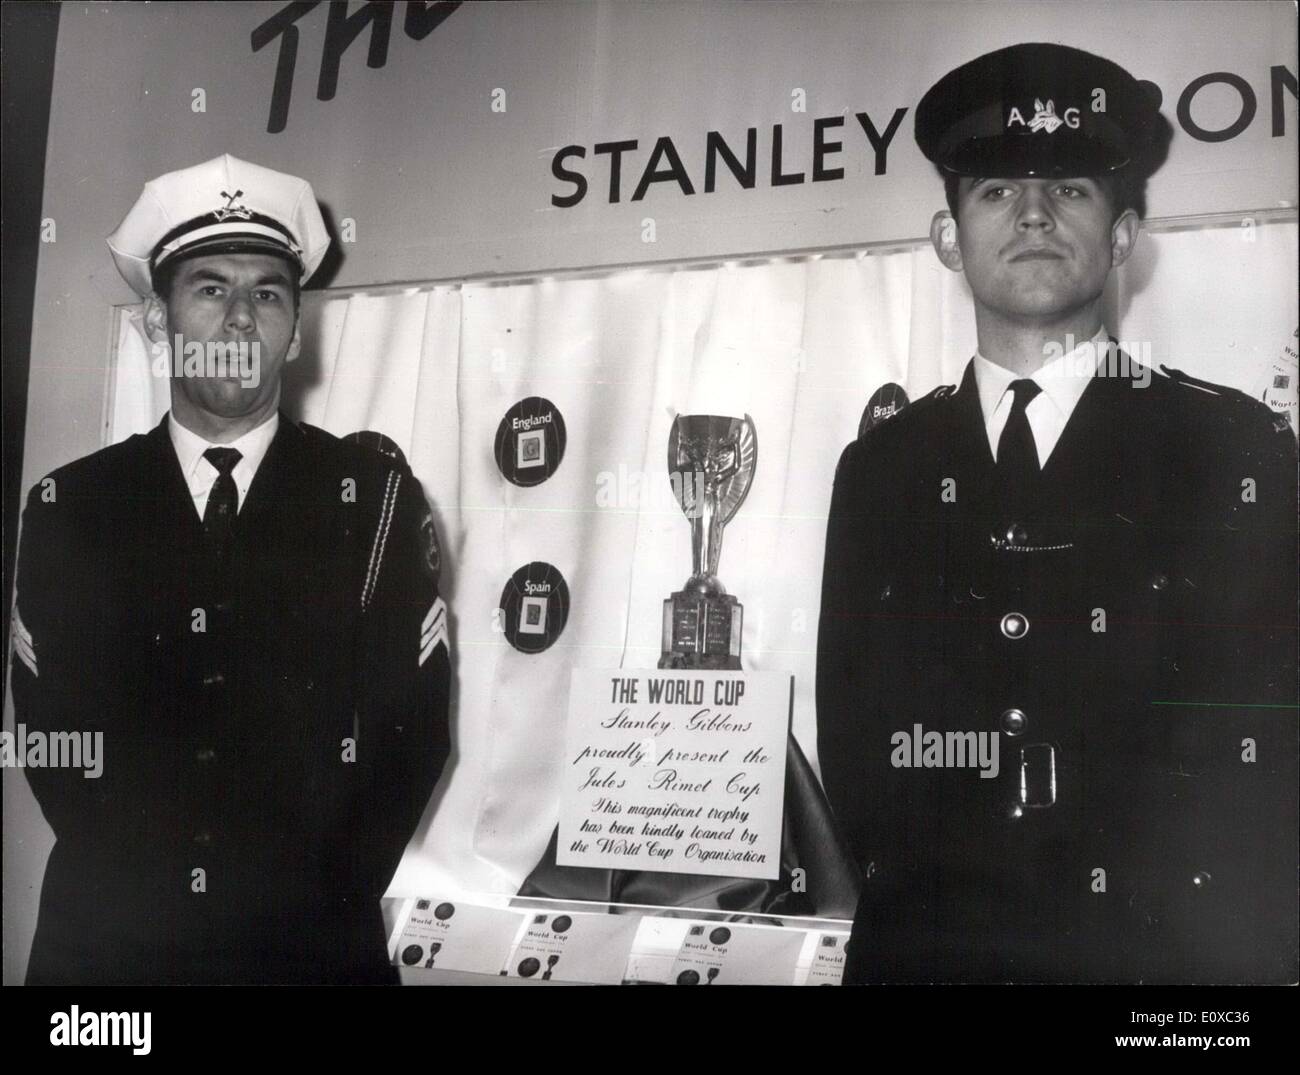 Mar. 18, 1966 - World Cup on Display at Stamp Exhibition.: ''Stampex'' - Britain's national stamp exhibition - opened today at Central Hall, Westminster. Theme of the exhibition is Sport- and on display is the famous Jules Rimet World Cup, which is insured for ?30,000. Photo shows Security guards with the World Cup - at Central Hall today. Stock Photo